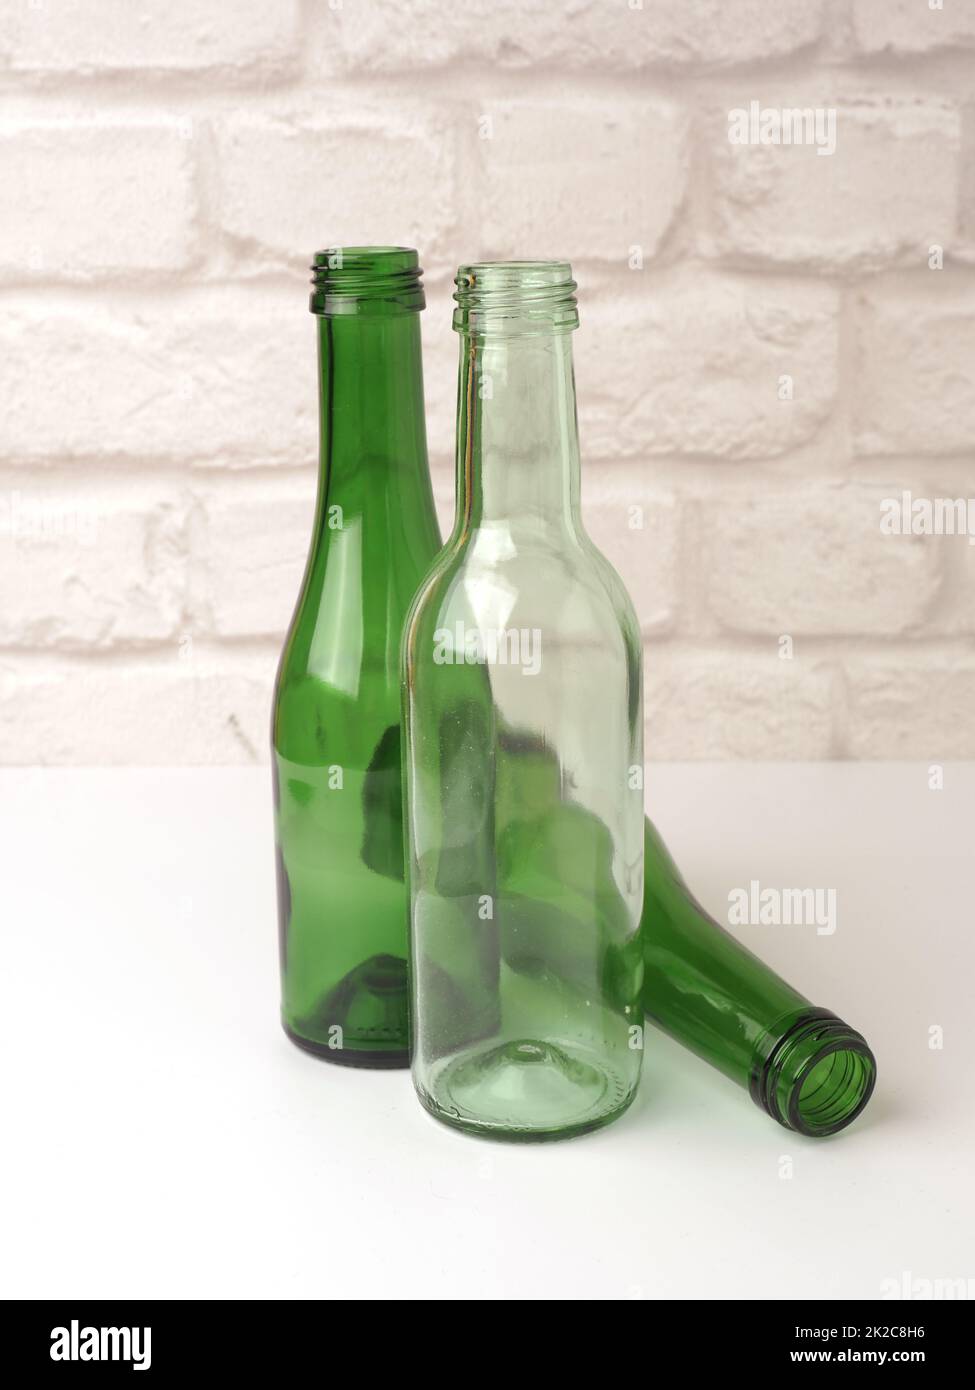 Green glass material recycling concept Stock Photo